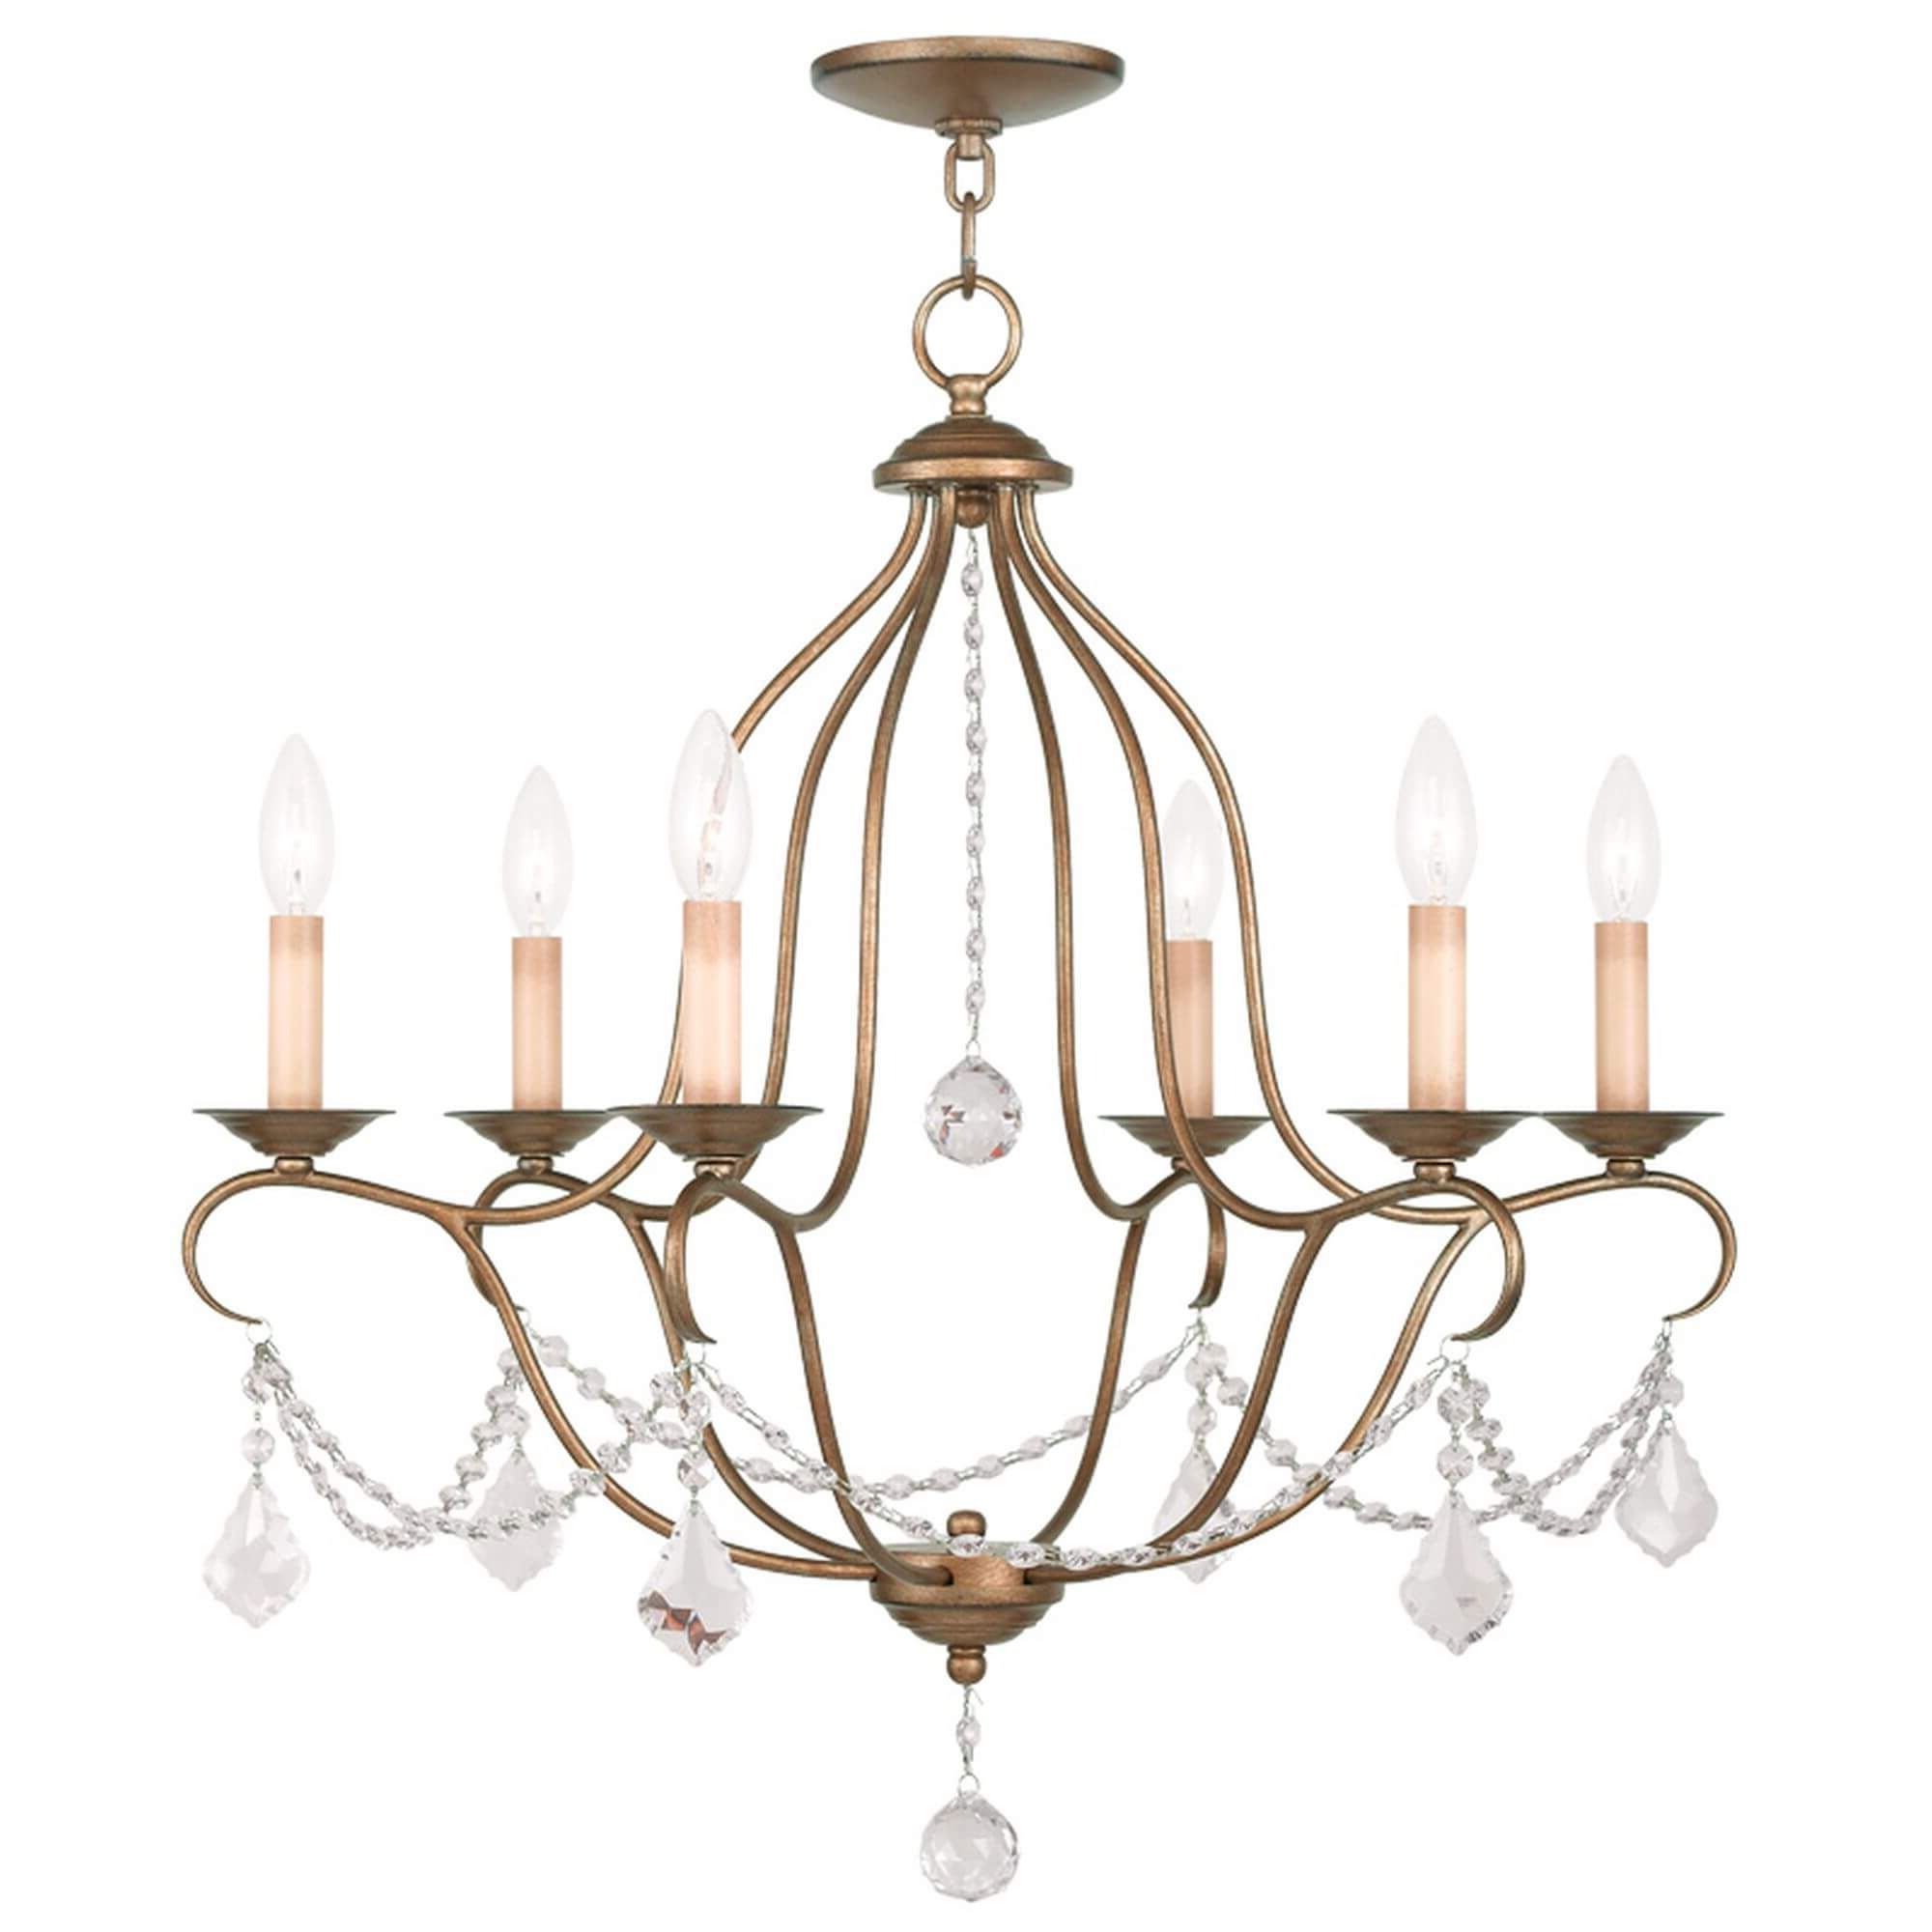 6 Light Antique Gold Leaf Chandelier Pertaining To 2020 Silver Leaf Chandeliers (View 6 of 20)